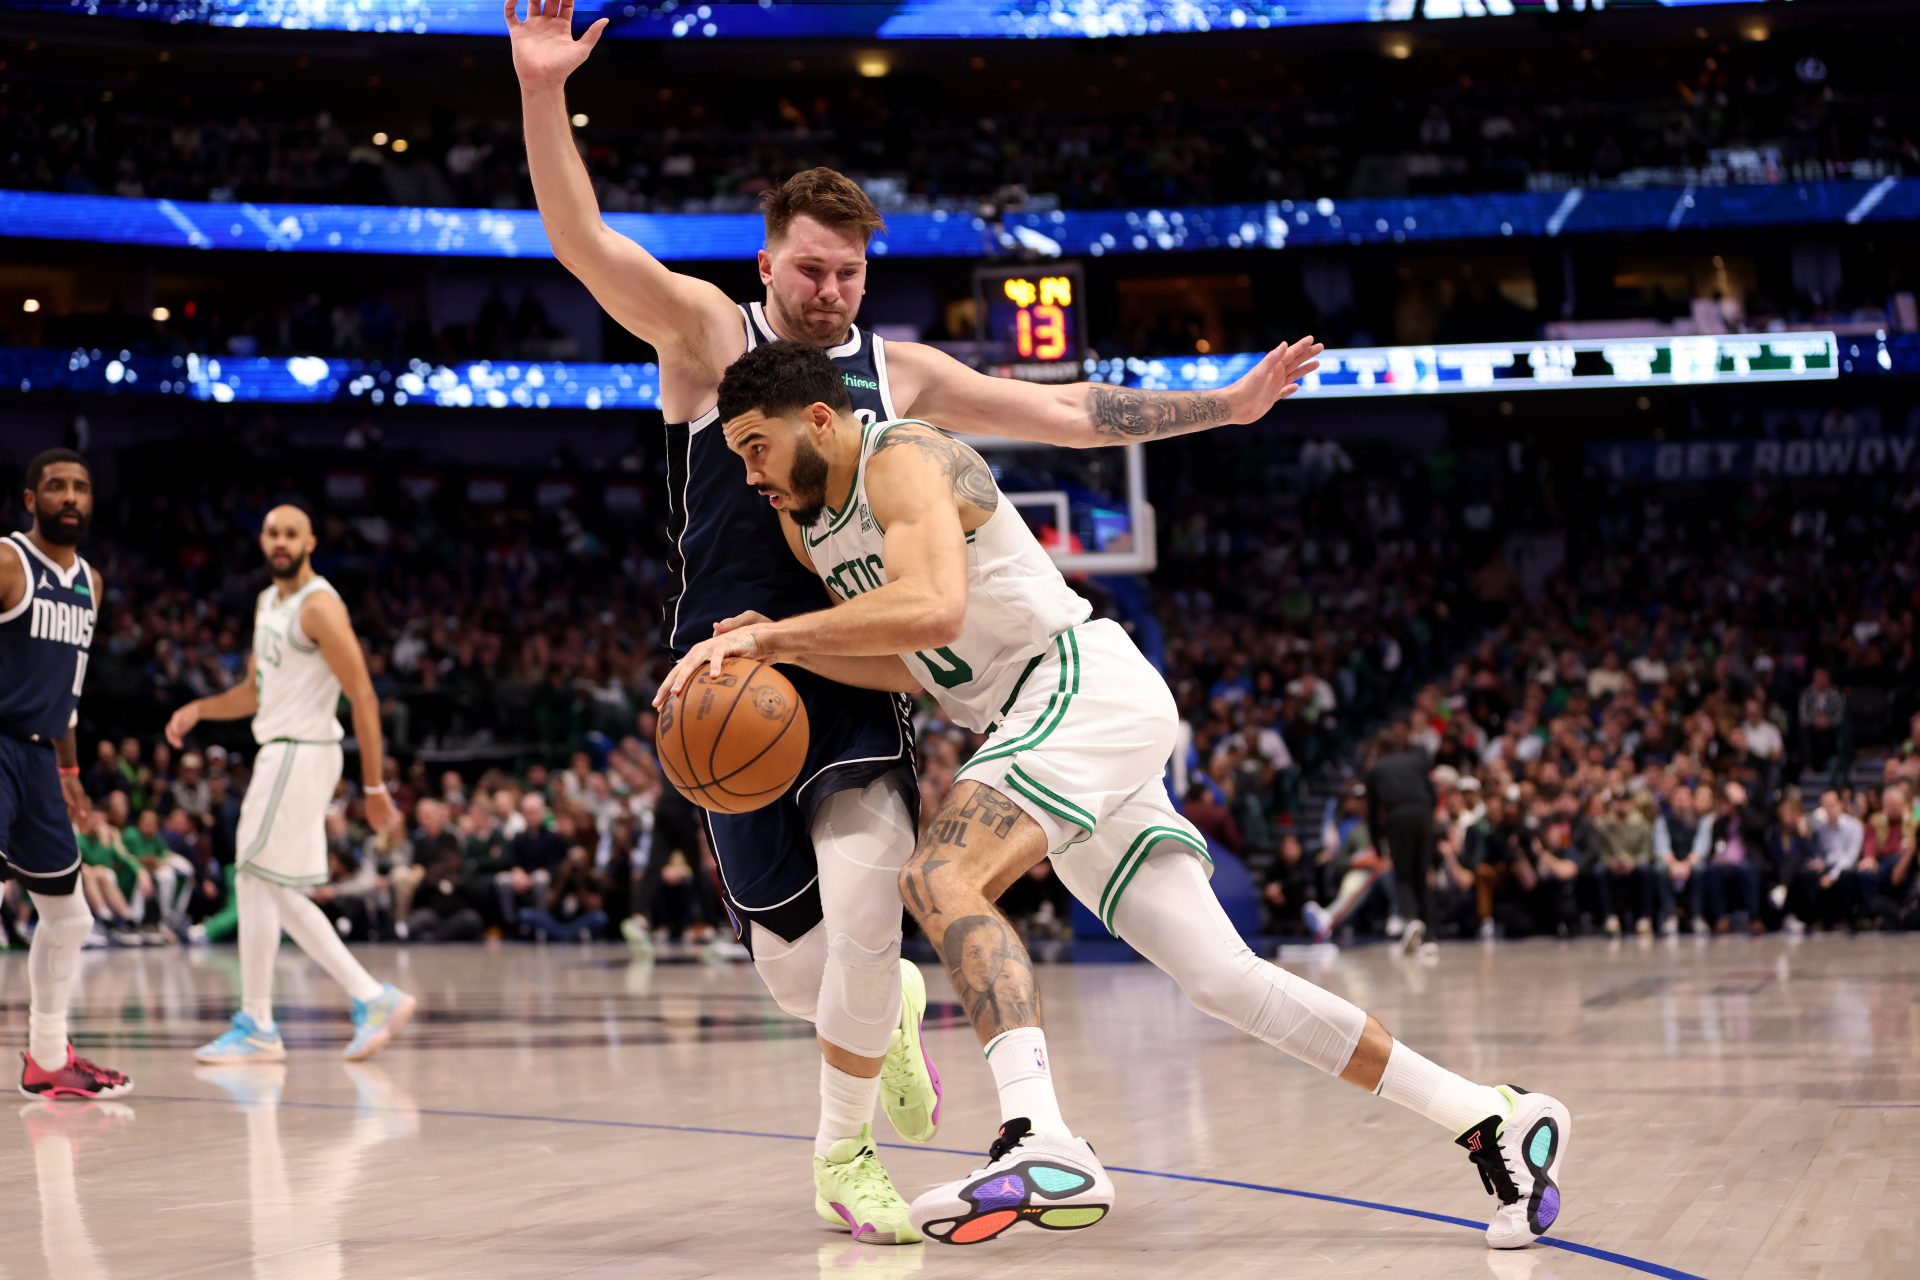 Who’s had the better career: Luka Doncic or Jayson Tatum?